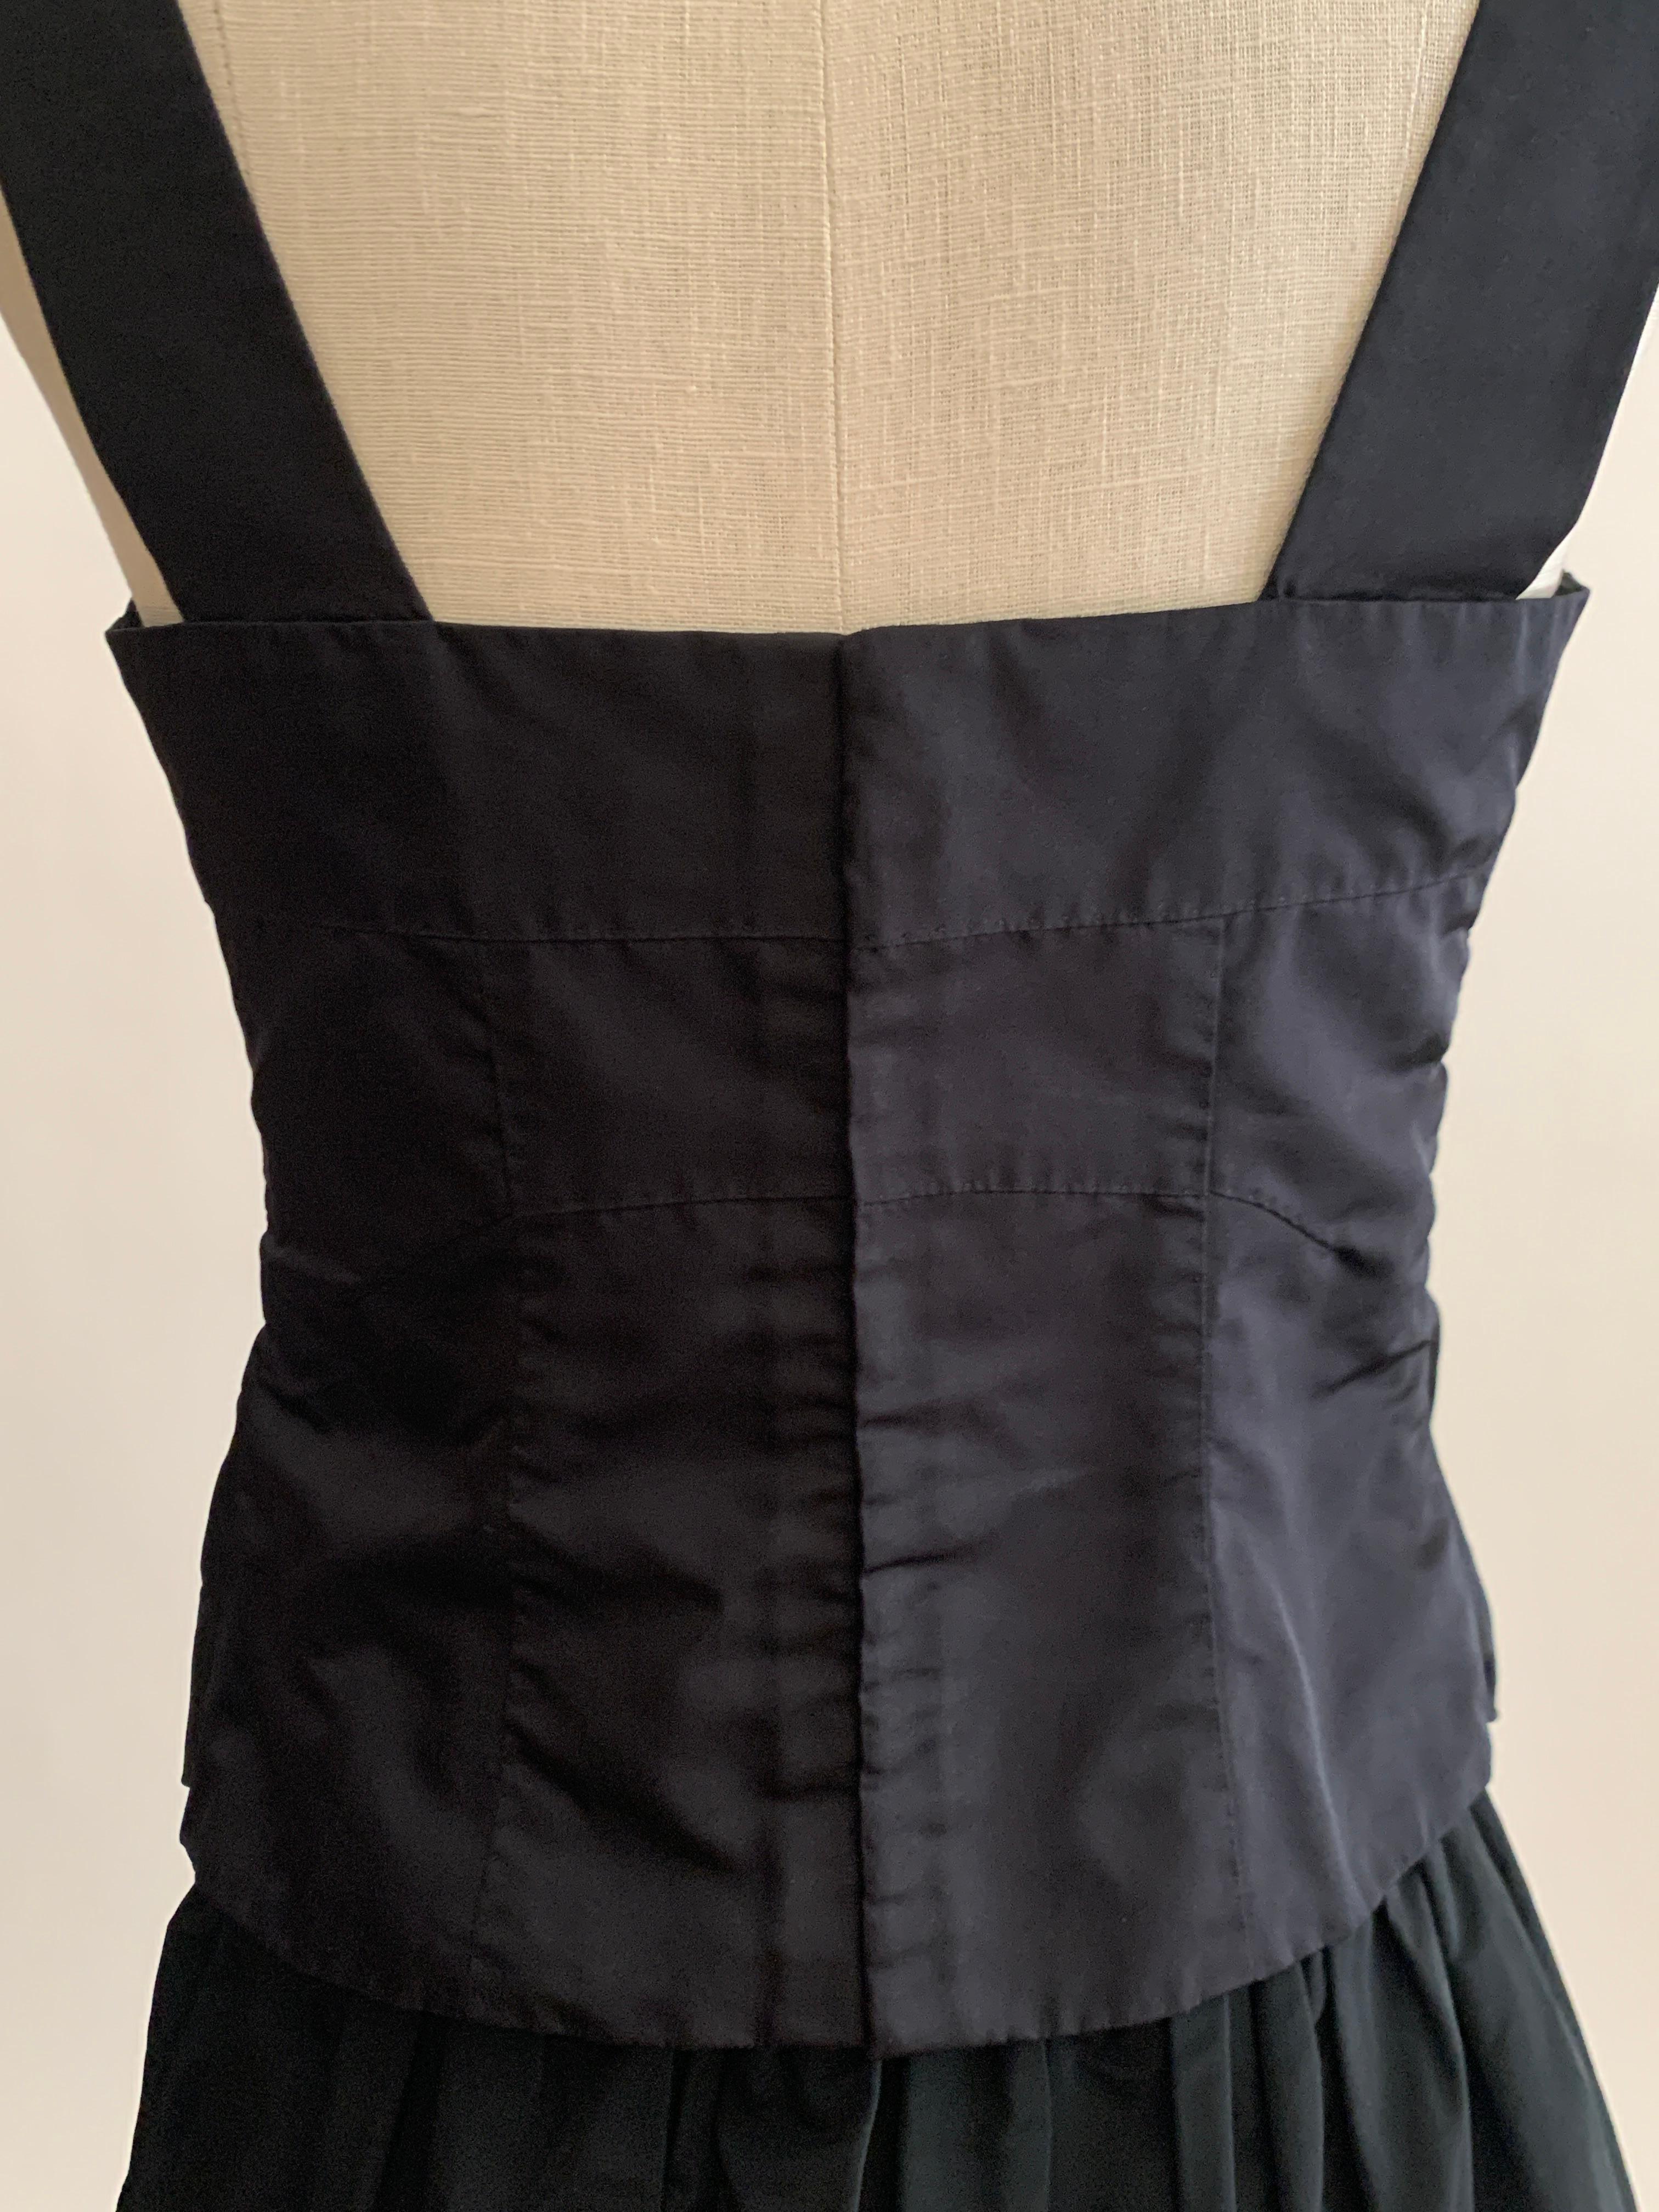 Women's Louis Vuitton Black Bustier Tank and Skirt Set with Bow Detail at Shoulders For Sale